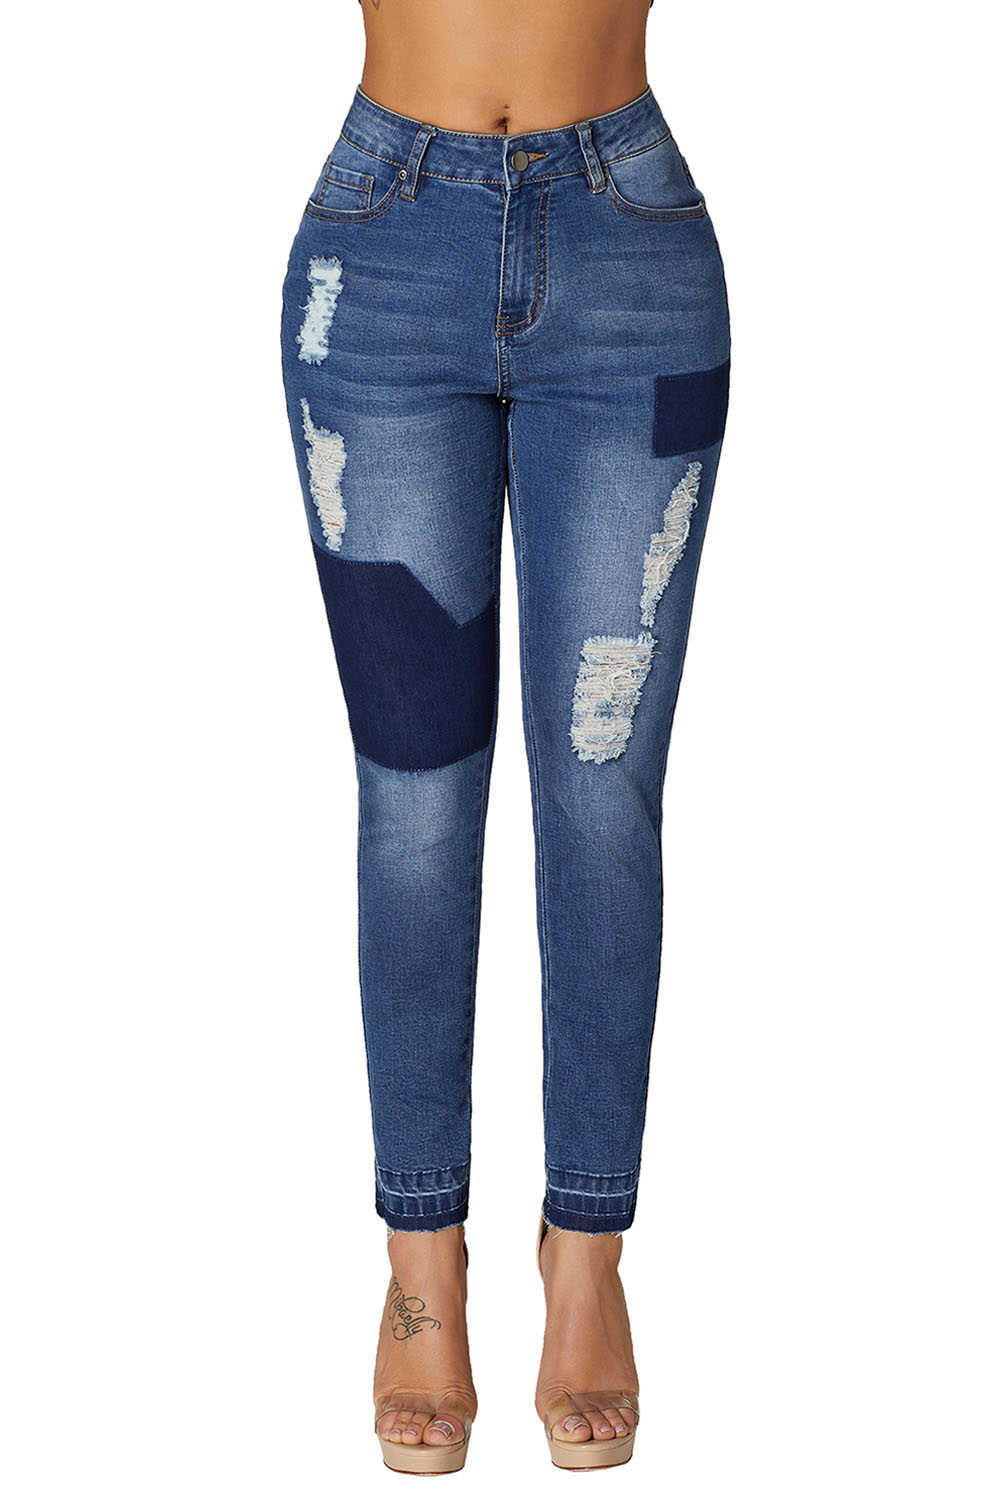 Vivacious Blue Individual Patched Ripped karve jeans